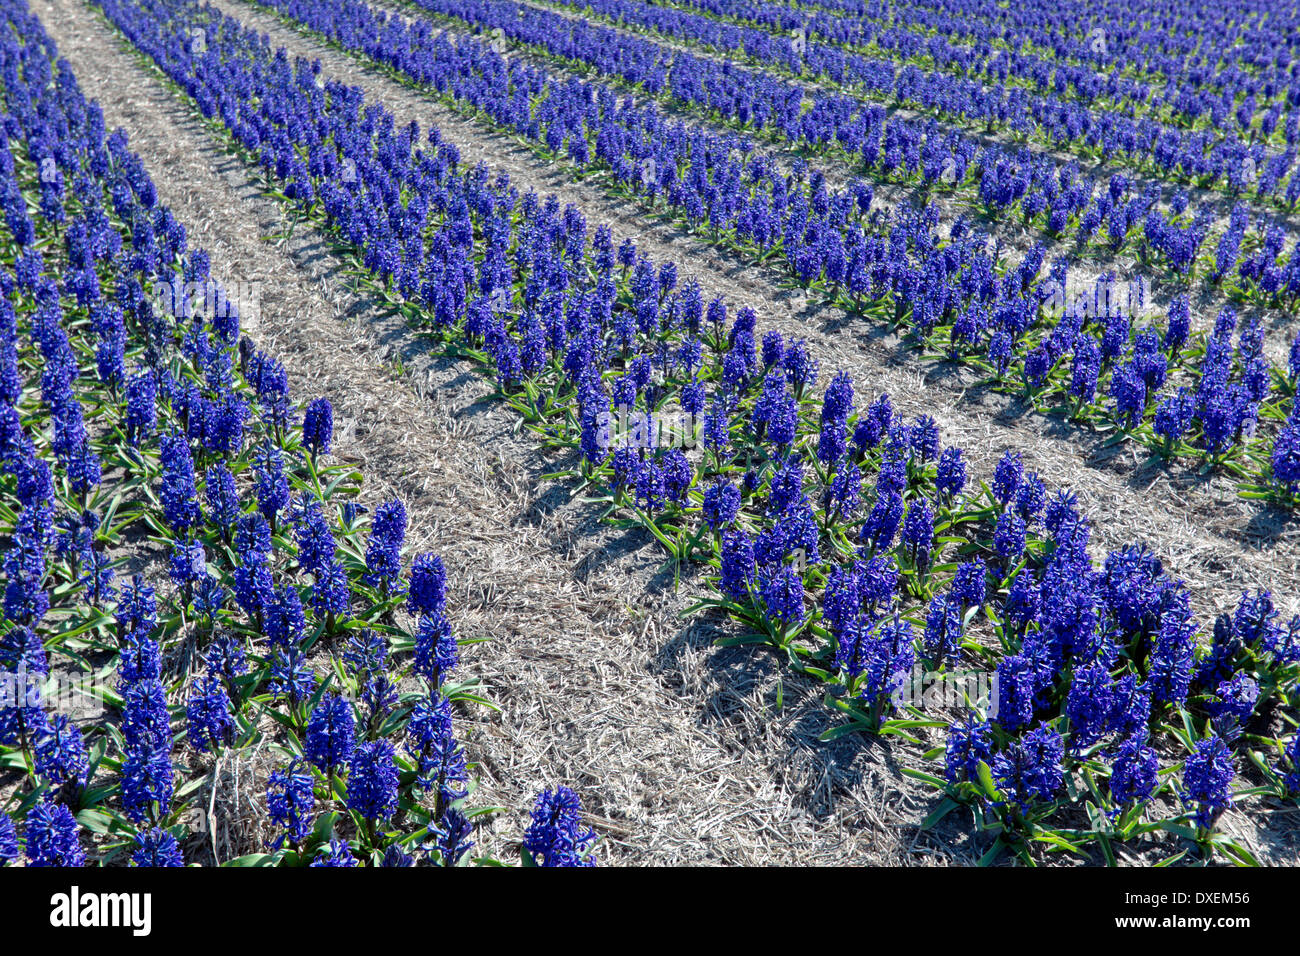 Bulb fields in spring: Wide angle view of blue hyacinths, Noordwijk, South Holland, The Netherlands. Stock Photo